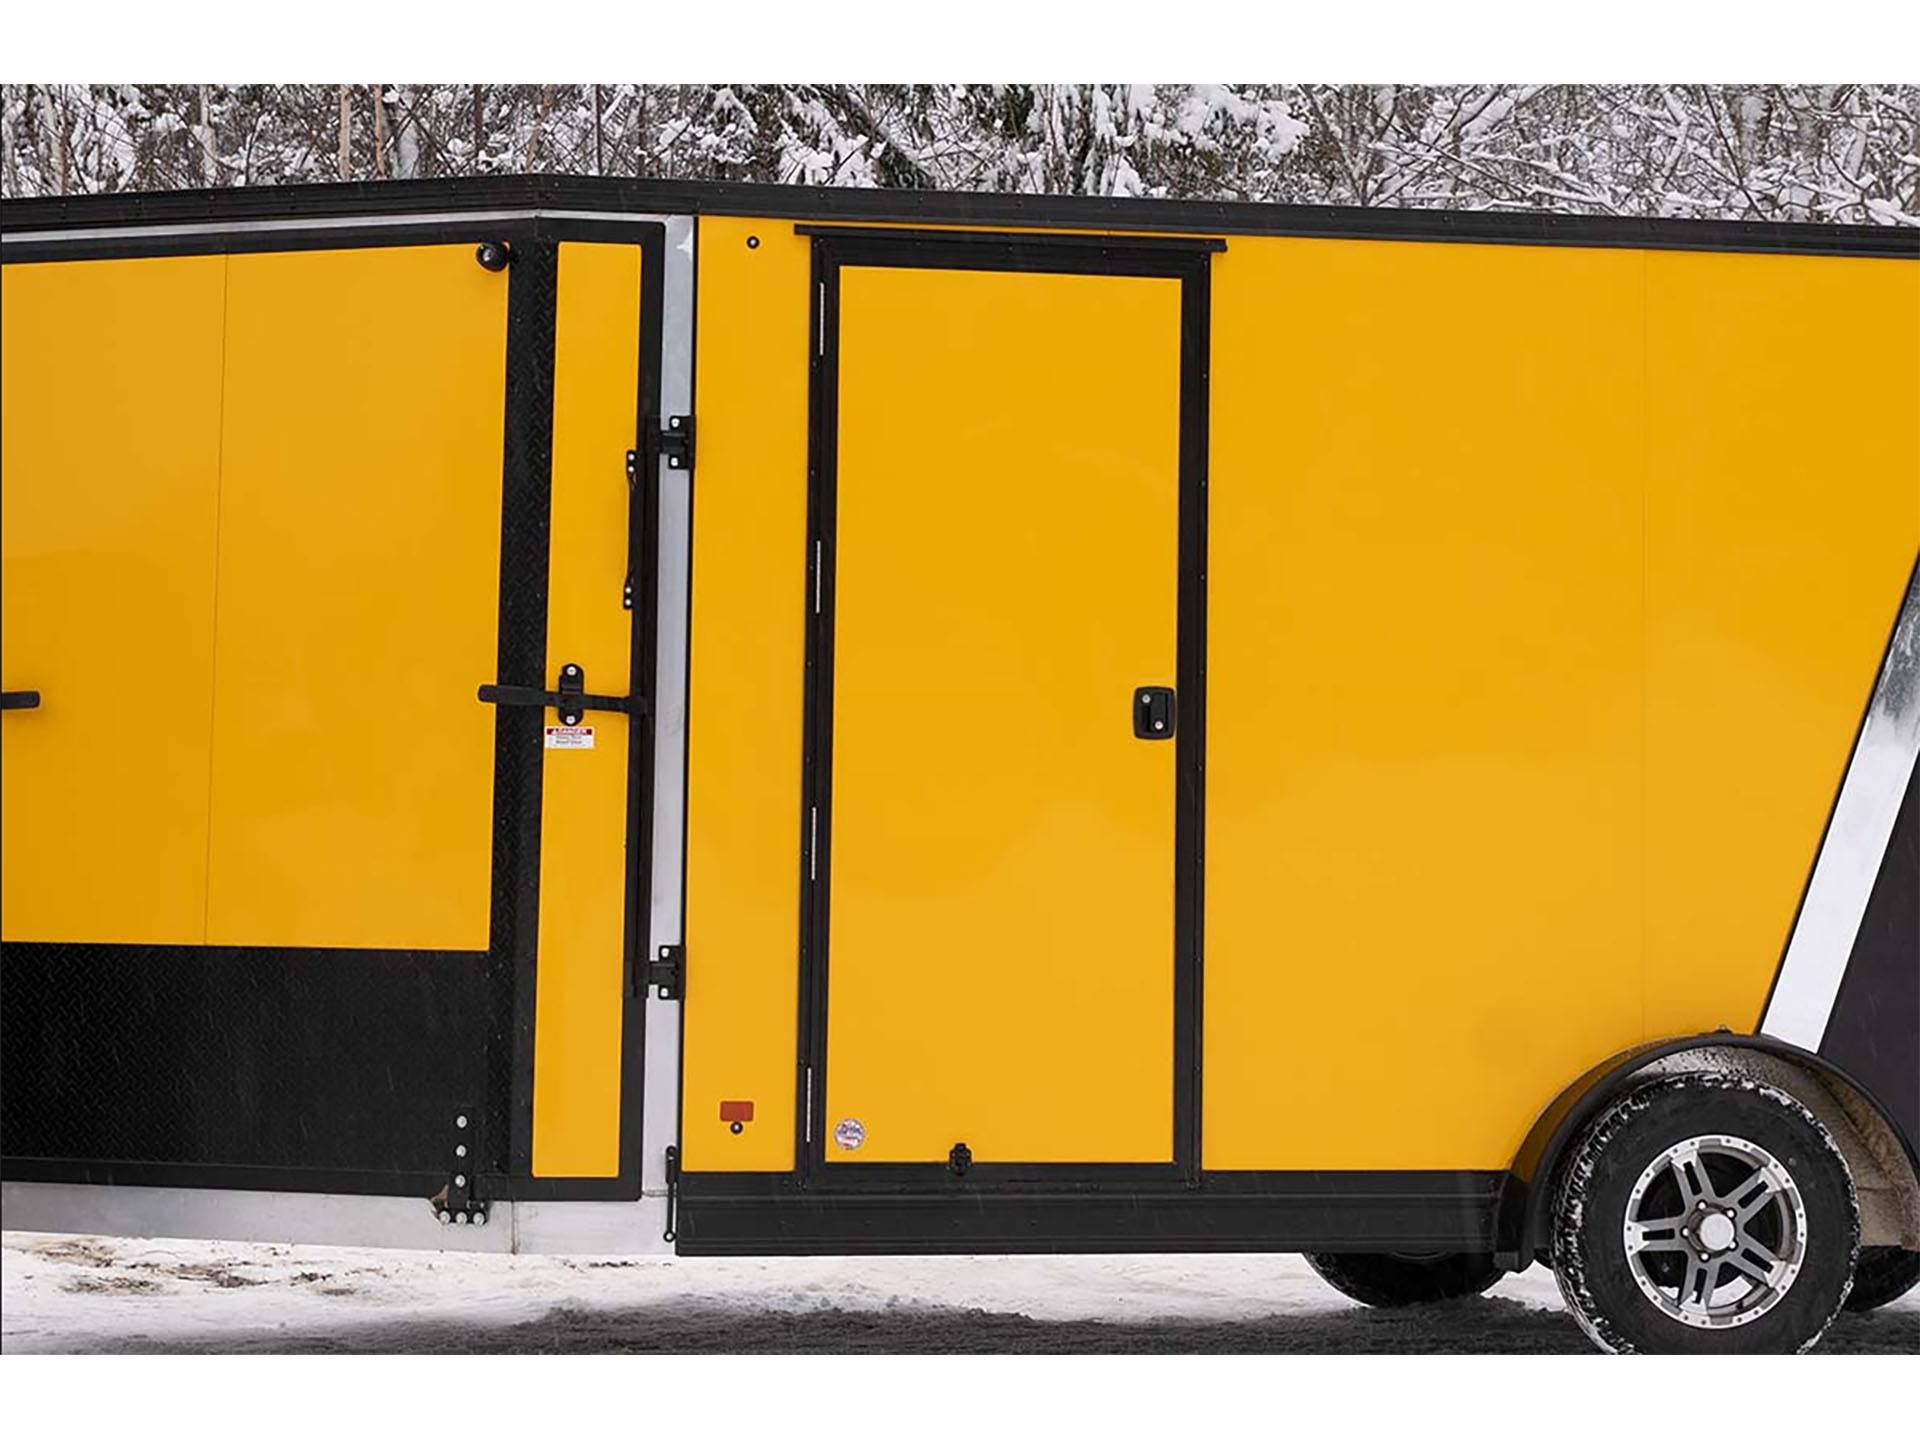 2024 Polaris Trailers Enclosed Elite Limited Snow Trailers 7 ft. Wide - 24 ft. Long in Lancaster, Texas - Photo 5